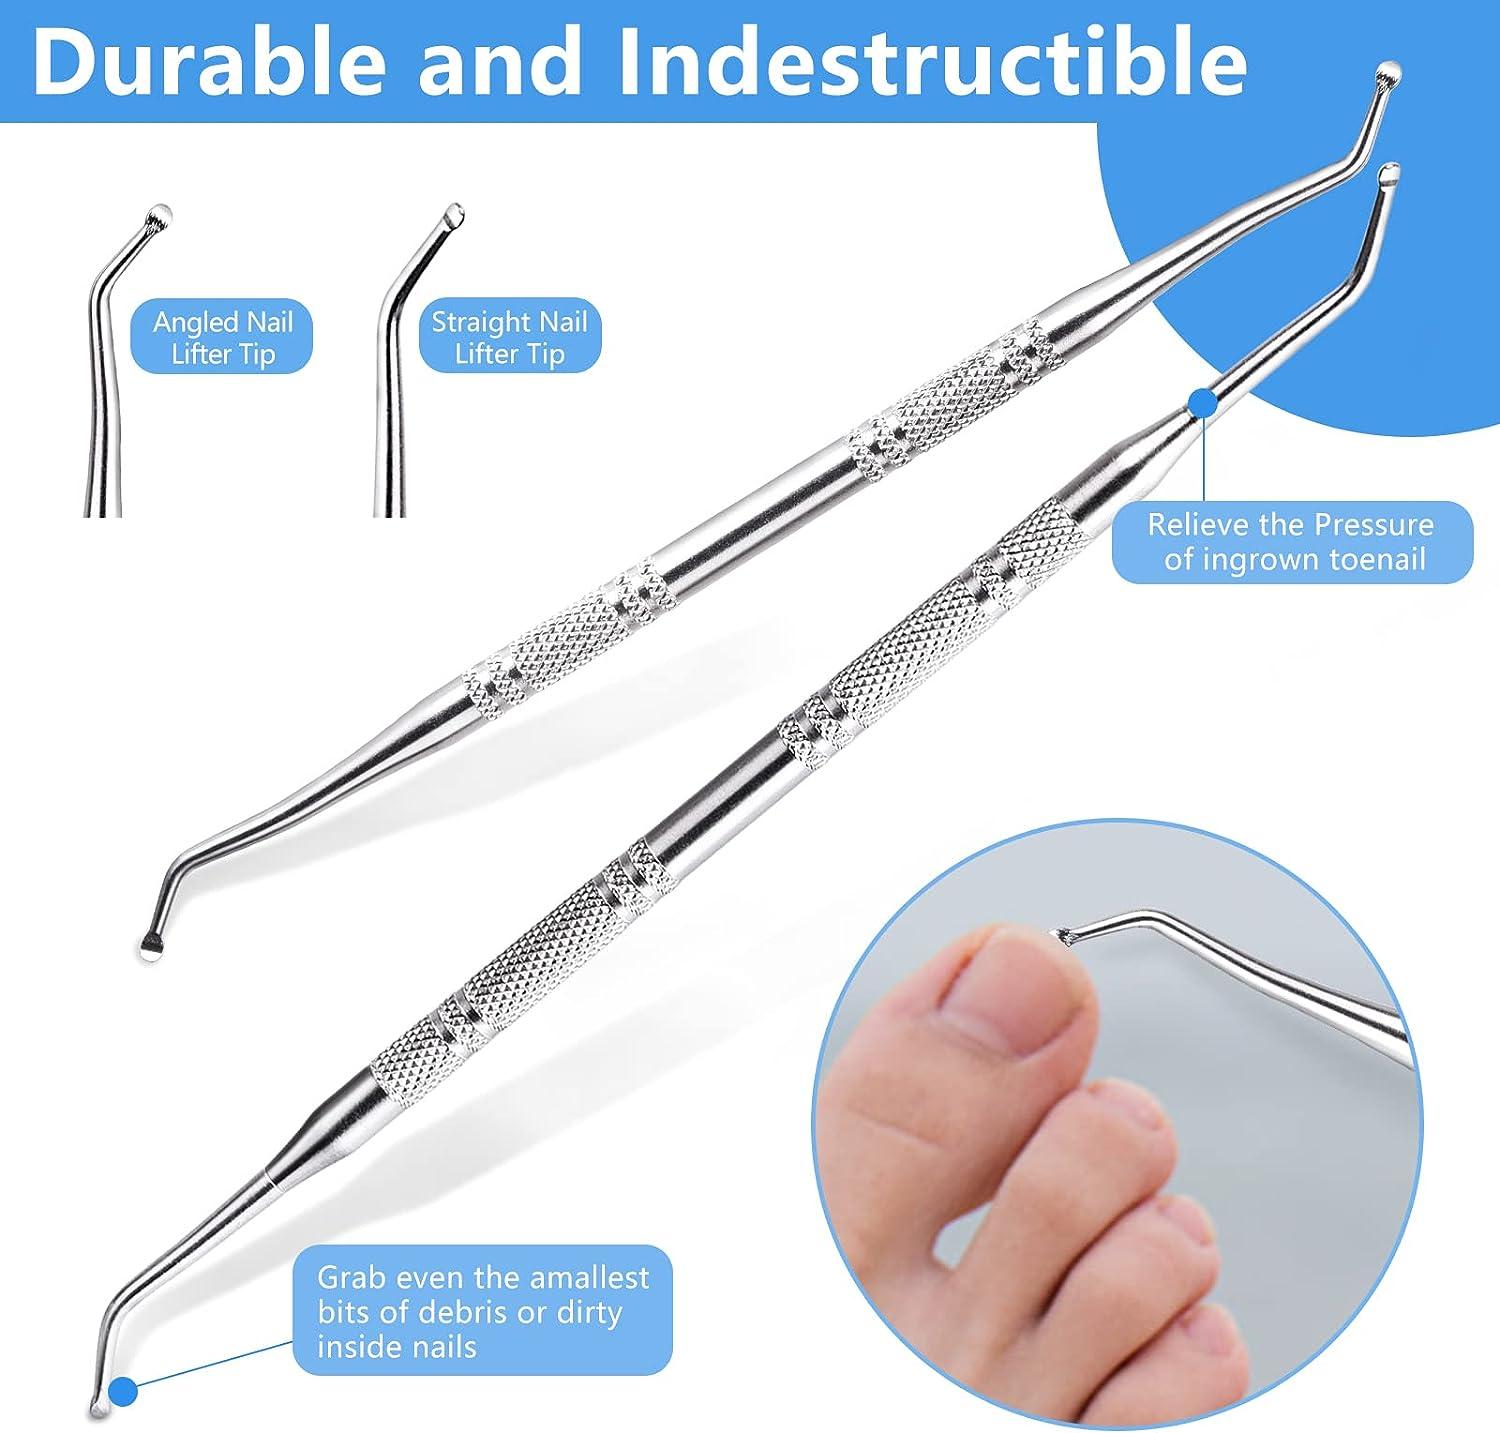 Stainless Steel Cuticle Pusher Remover Nail Cleaner Manicure Pedicure Tools  | eBay